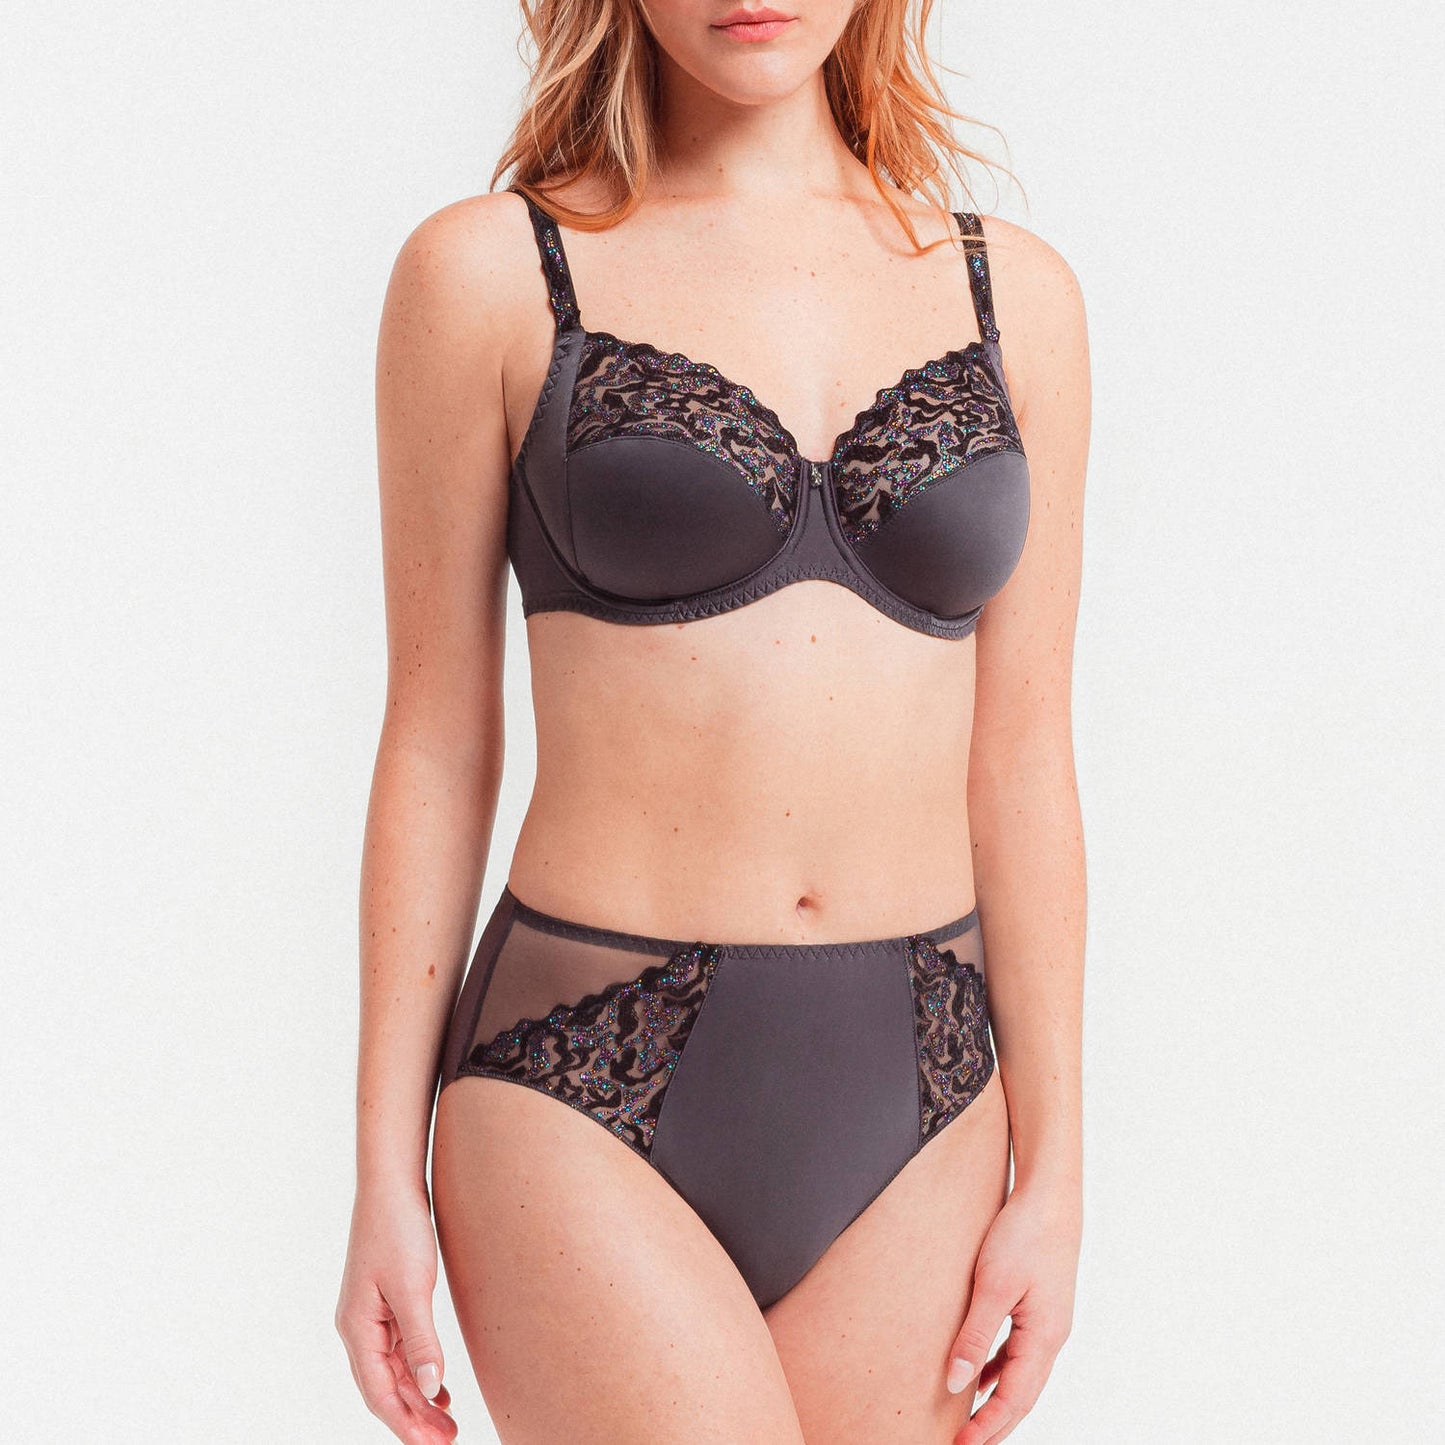 Electric Waves in Smoke Full Cup Bra By Louisa Bracq - 30-46 bands, B-I cups (EURO sizing)